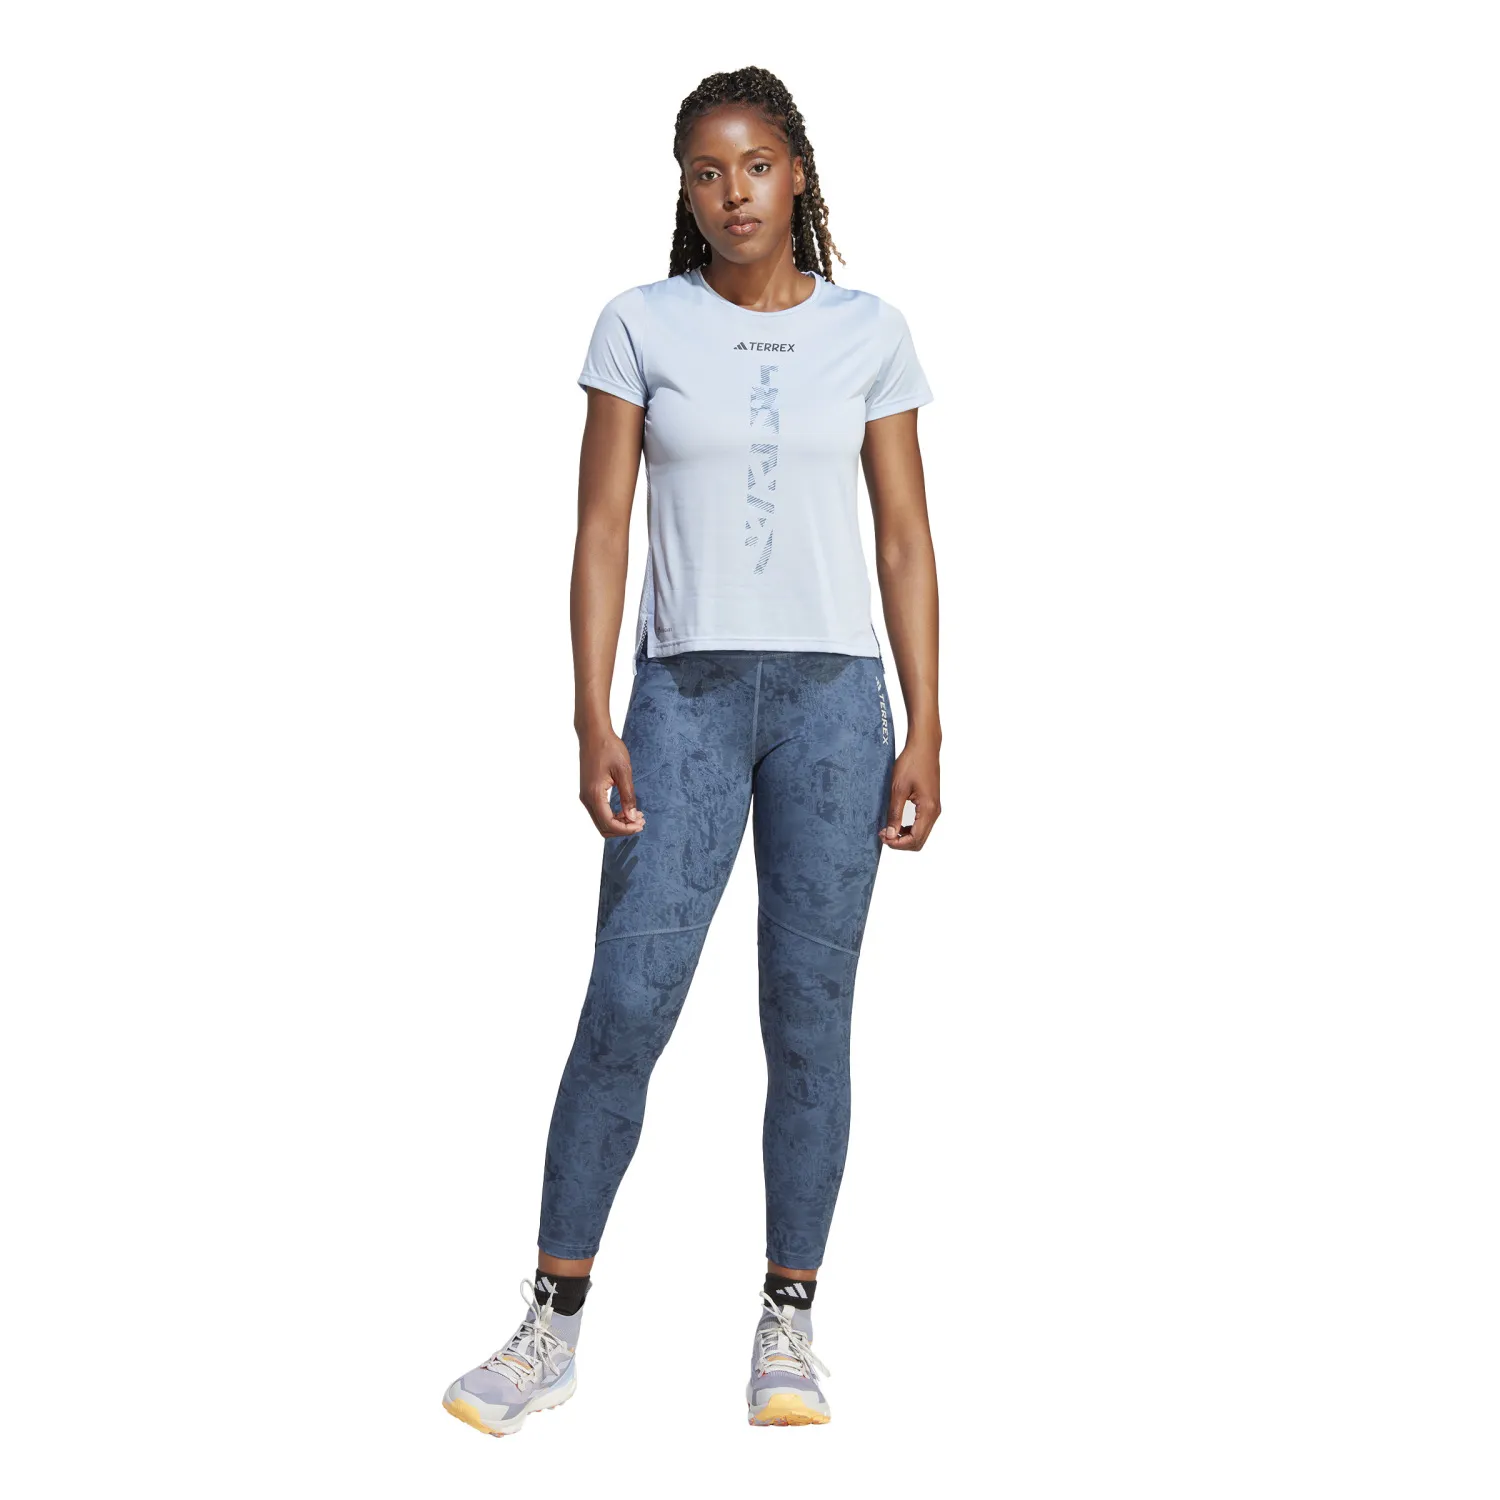 HM4010_6_APPAREL_On Model_Standard Outfit View_transparent.jpg